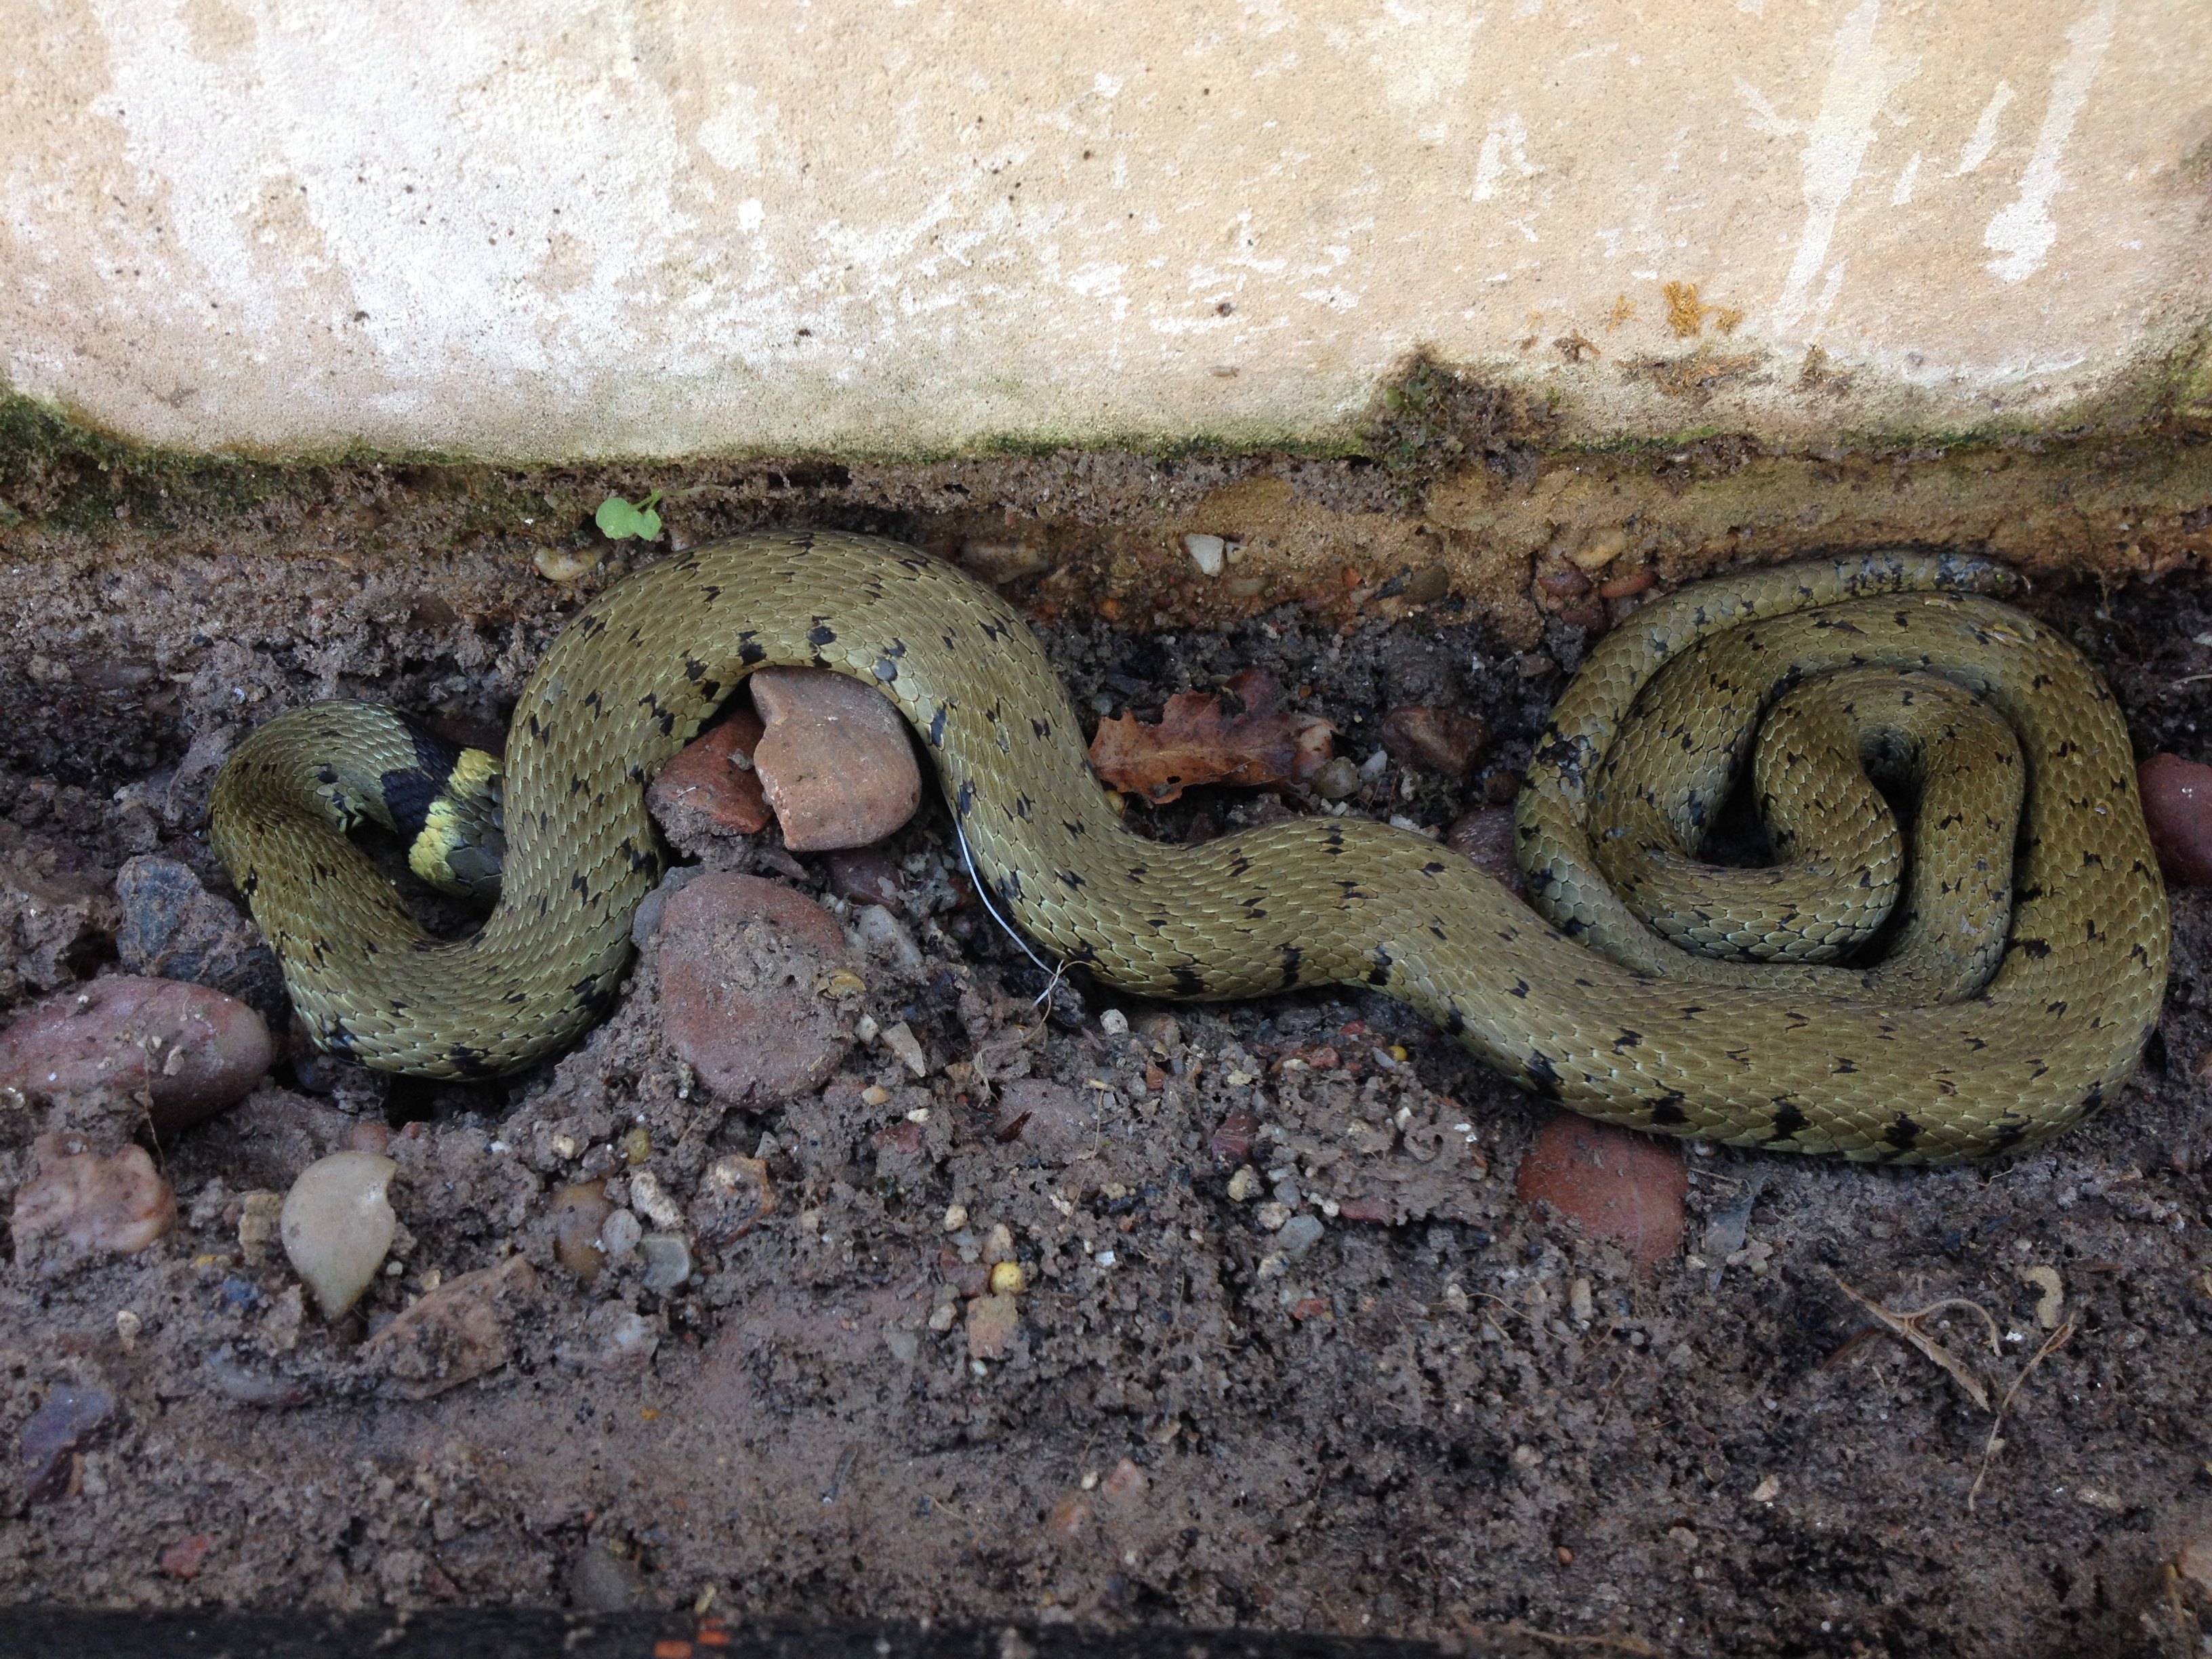 Grass snake spotted on Streatham Campus | Budding News